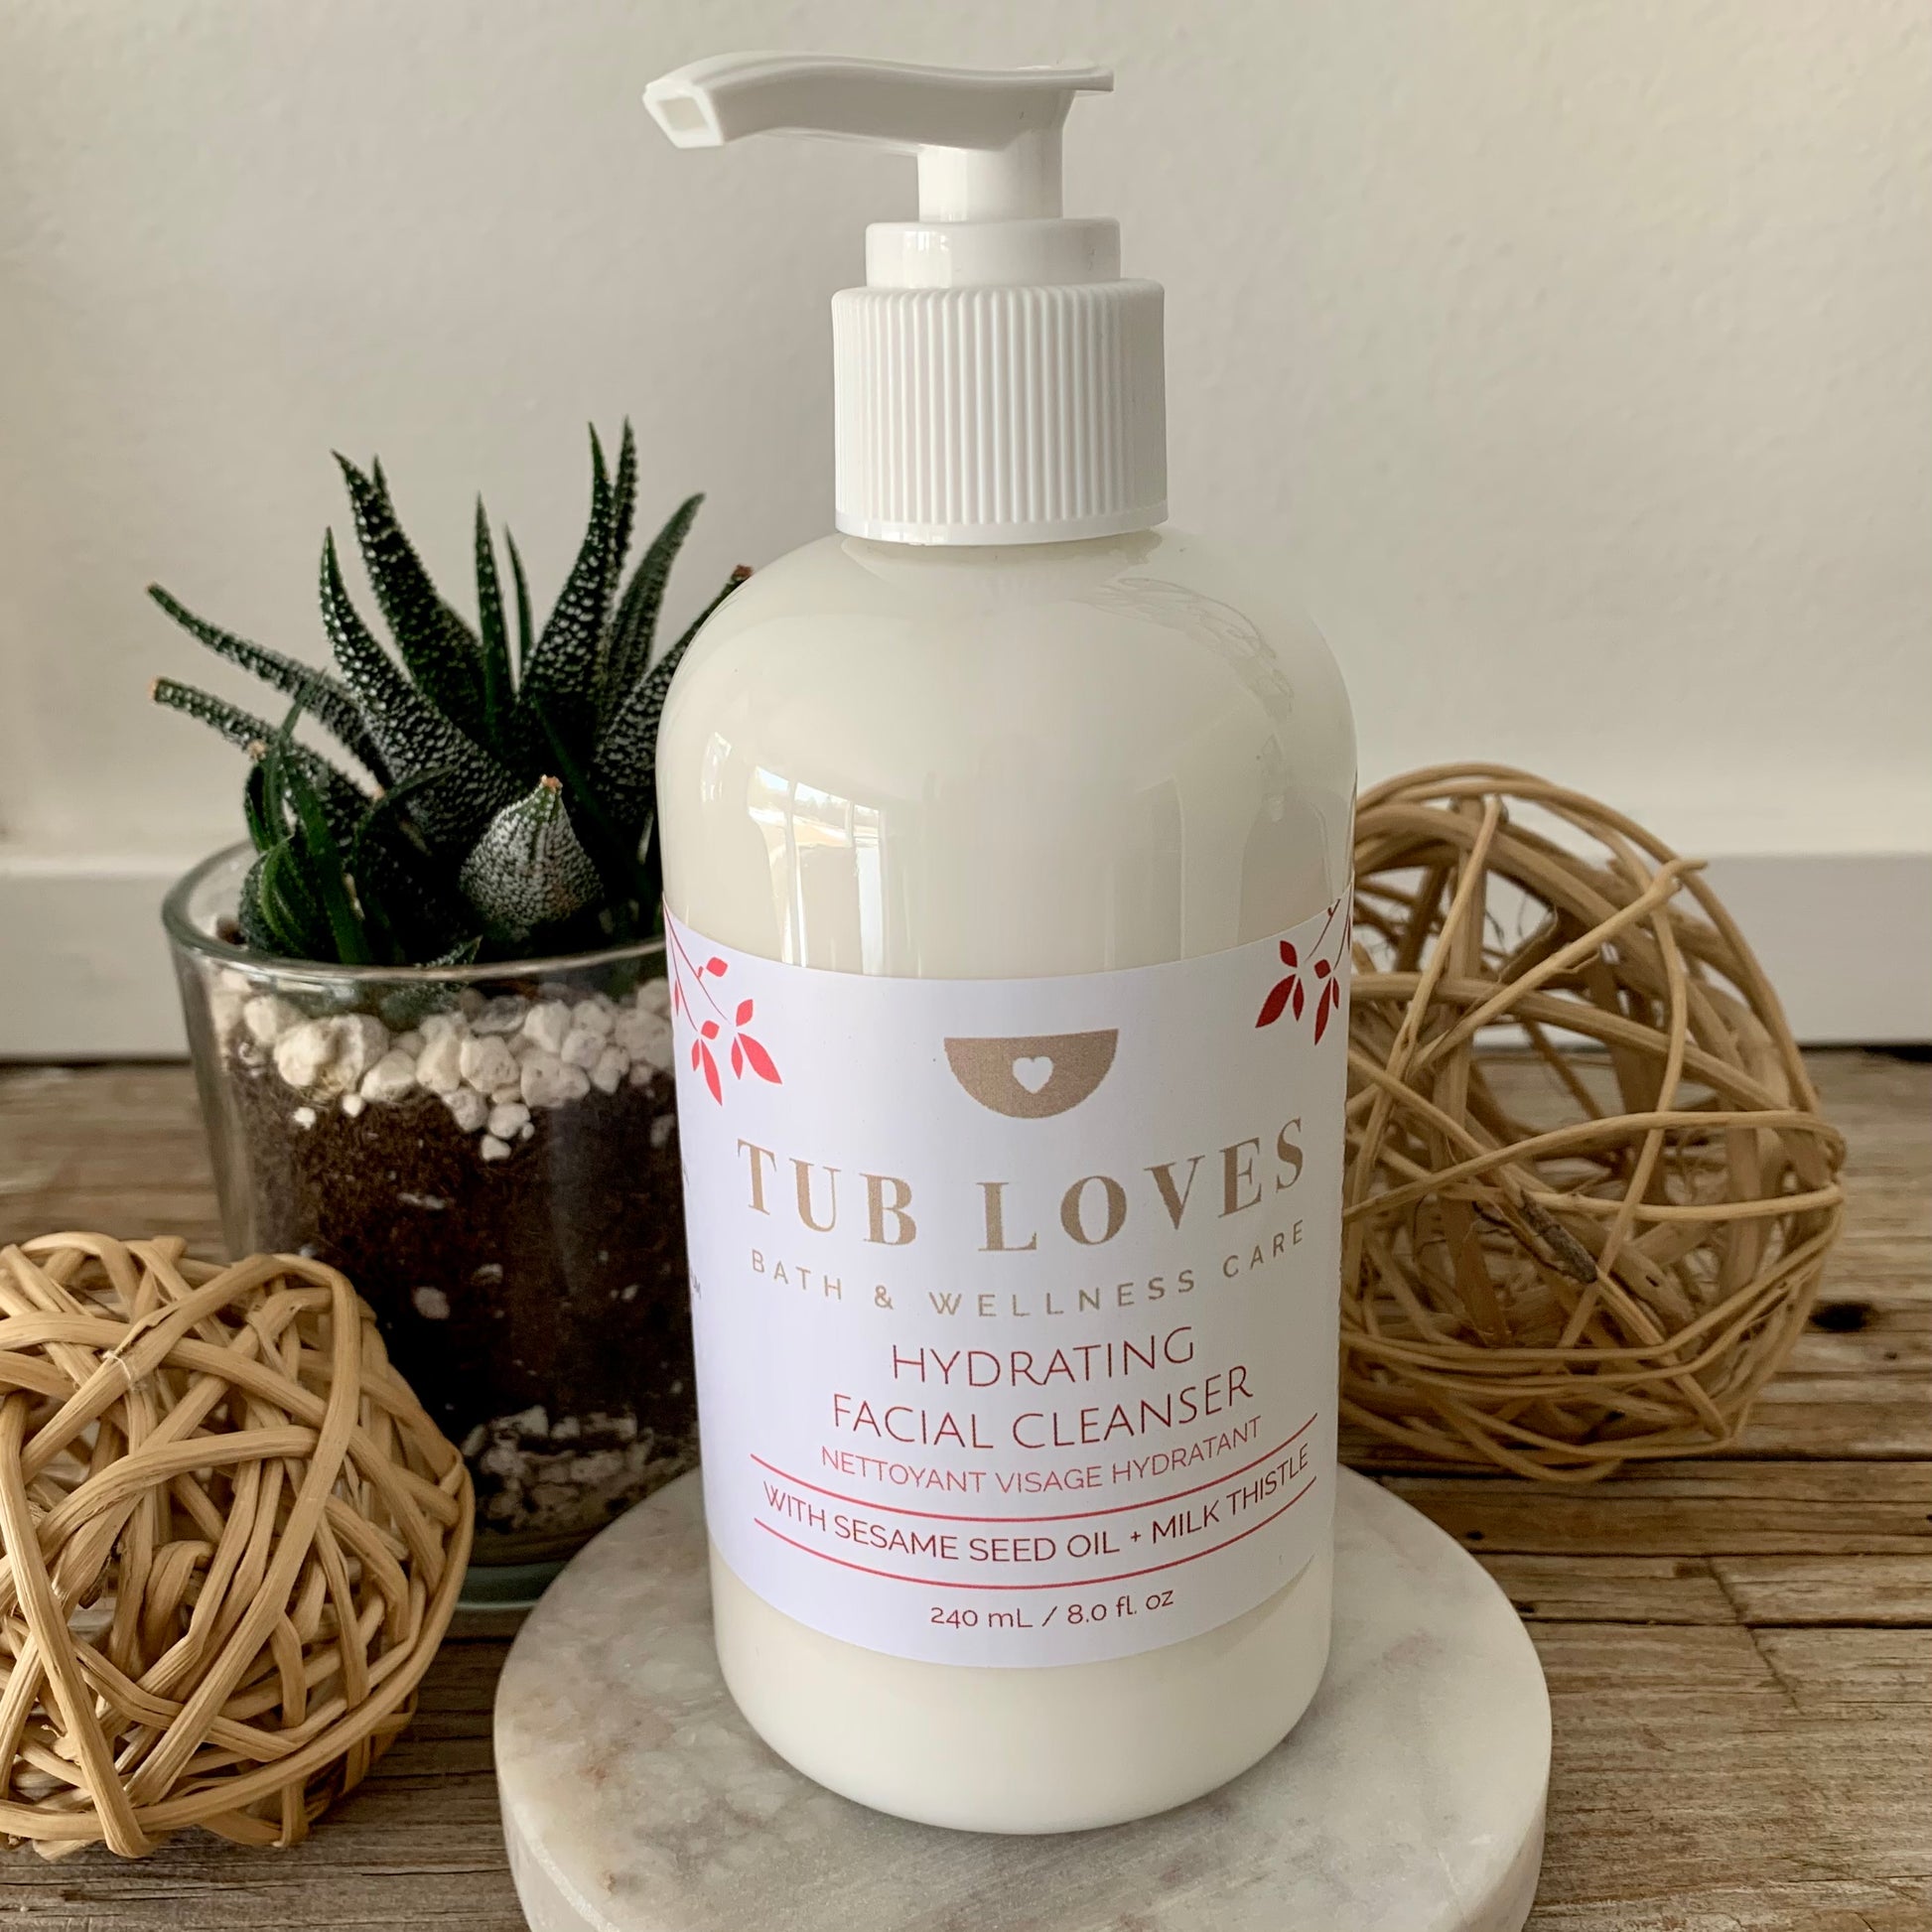 HYDRATING FACIAL CLEANSER + ANTIOXIDANT-ENRICHED MOISTURIZER - Tub Loves